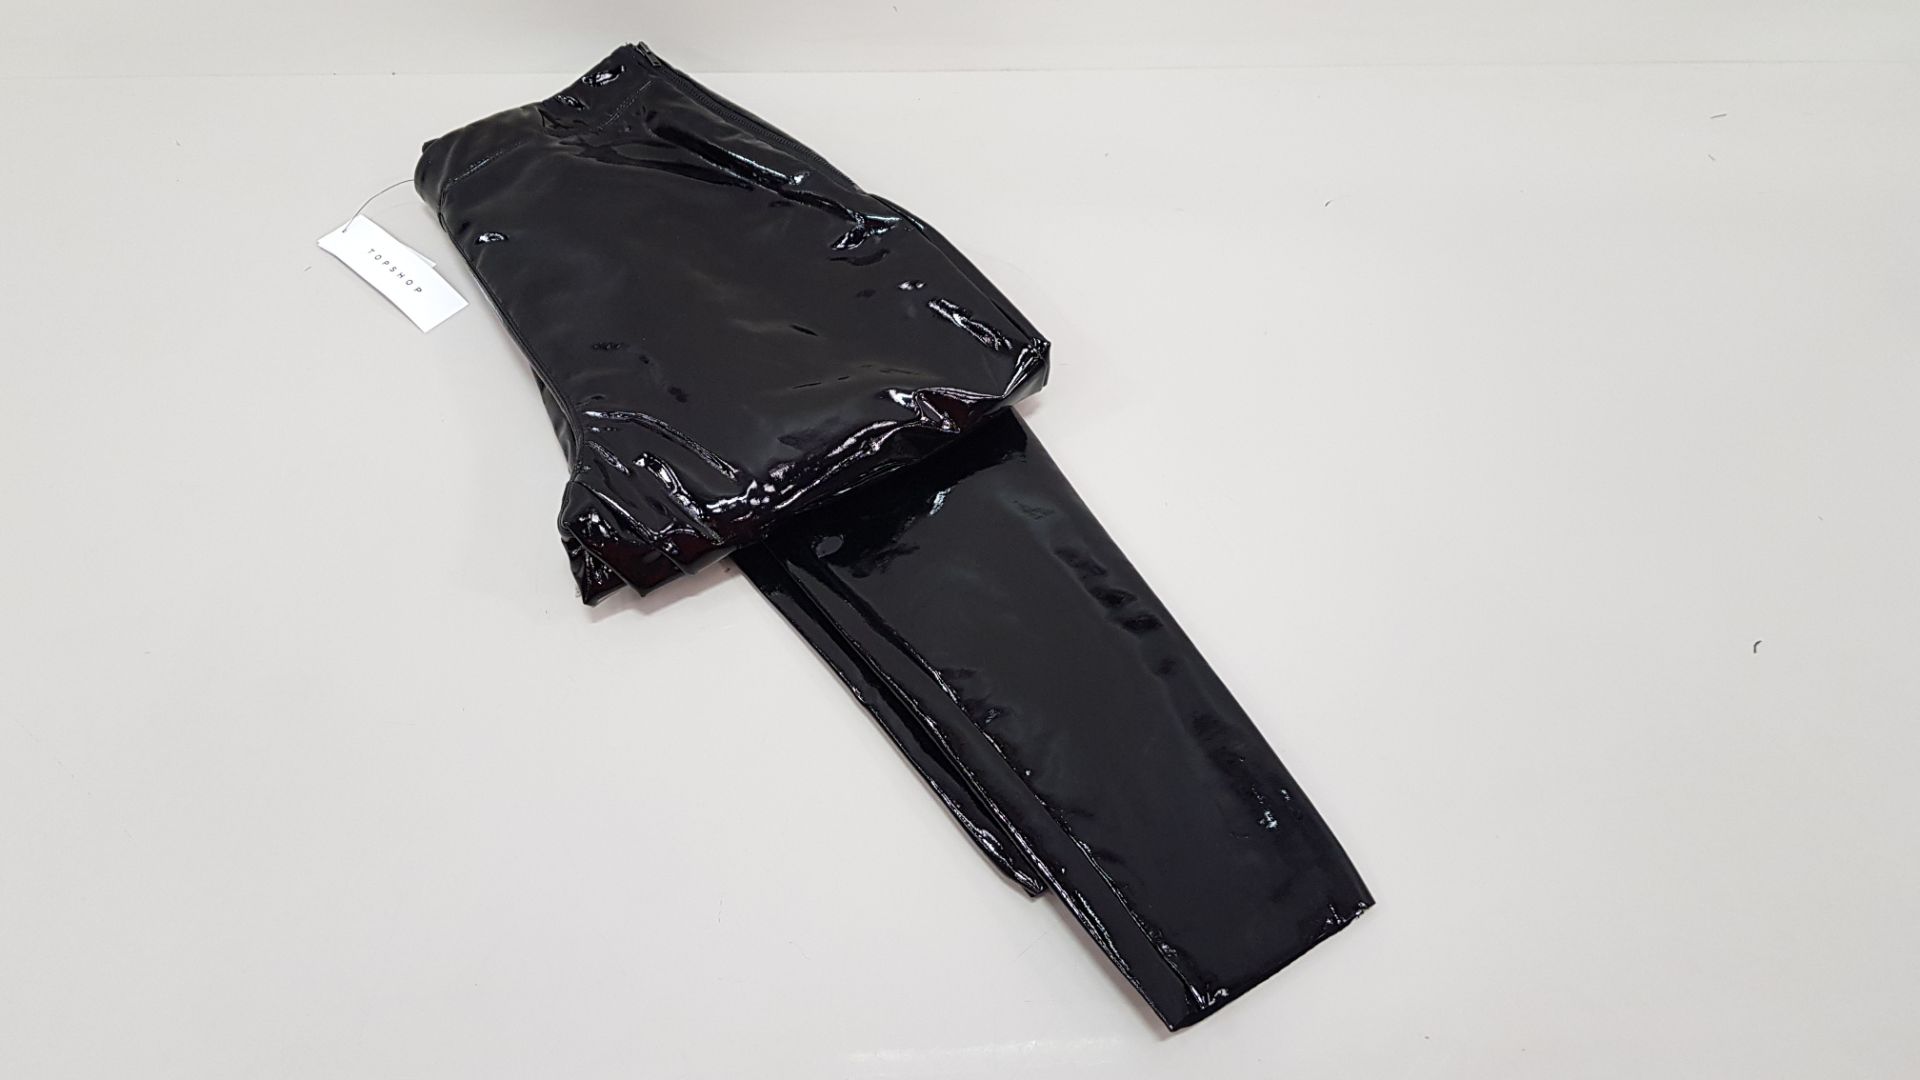 12 X BRAND NEW TOPSHOP PANTS - 10 X UK SIZE 8 AND 2 X UK SIZE 10 RRP £36.00 (TOTAL RRP £432.00)